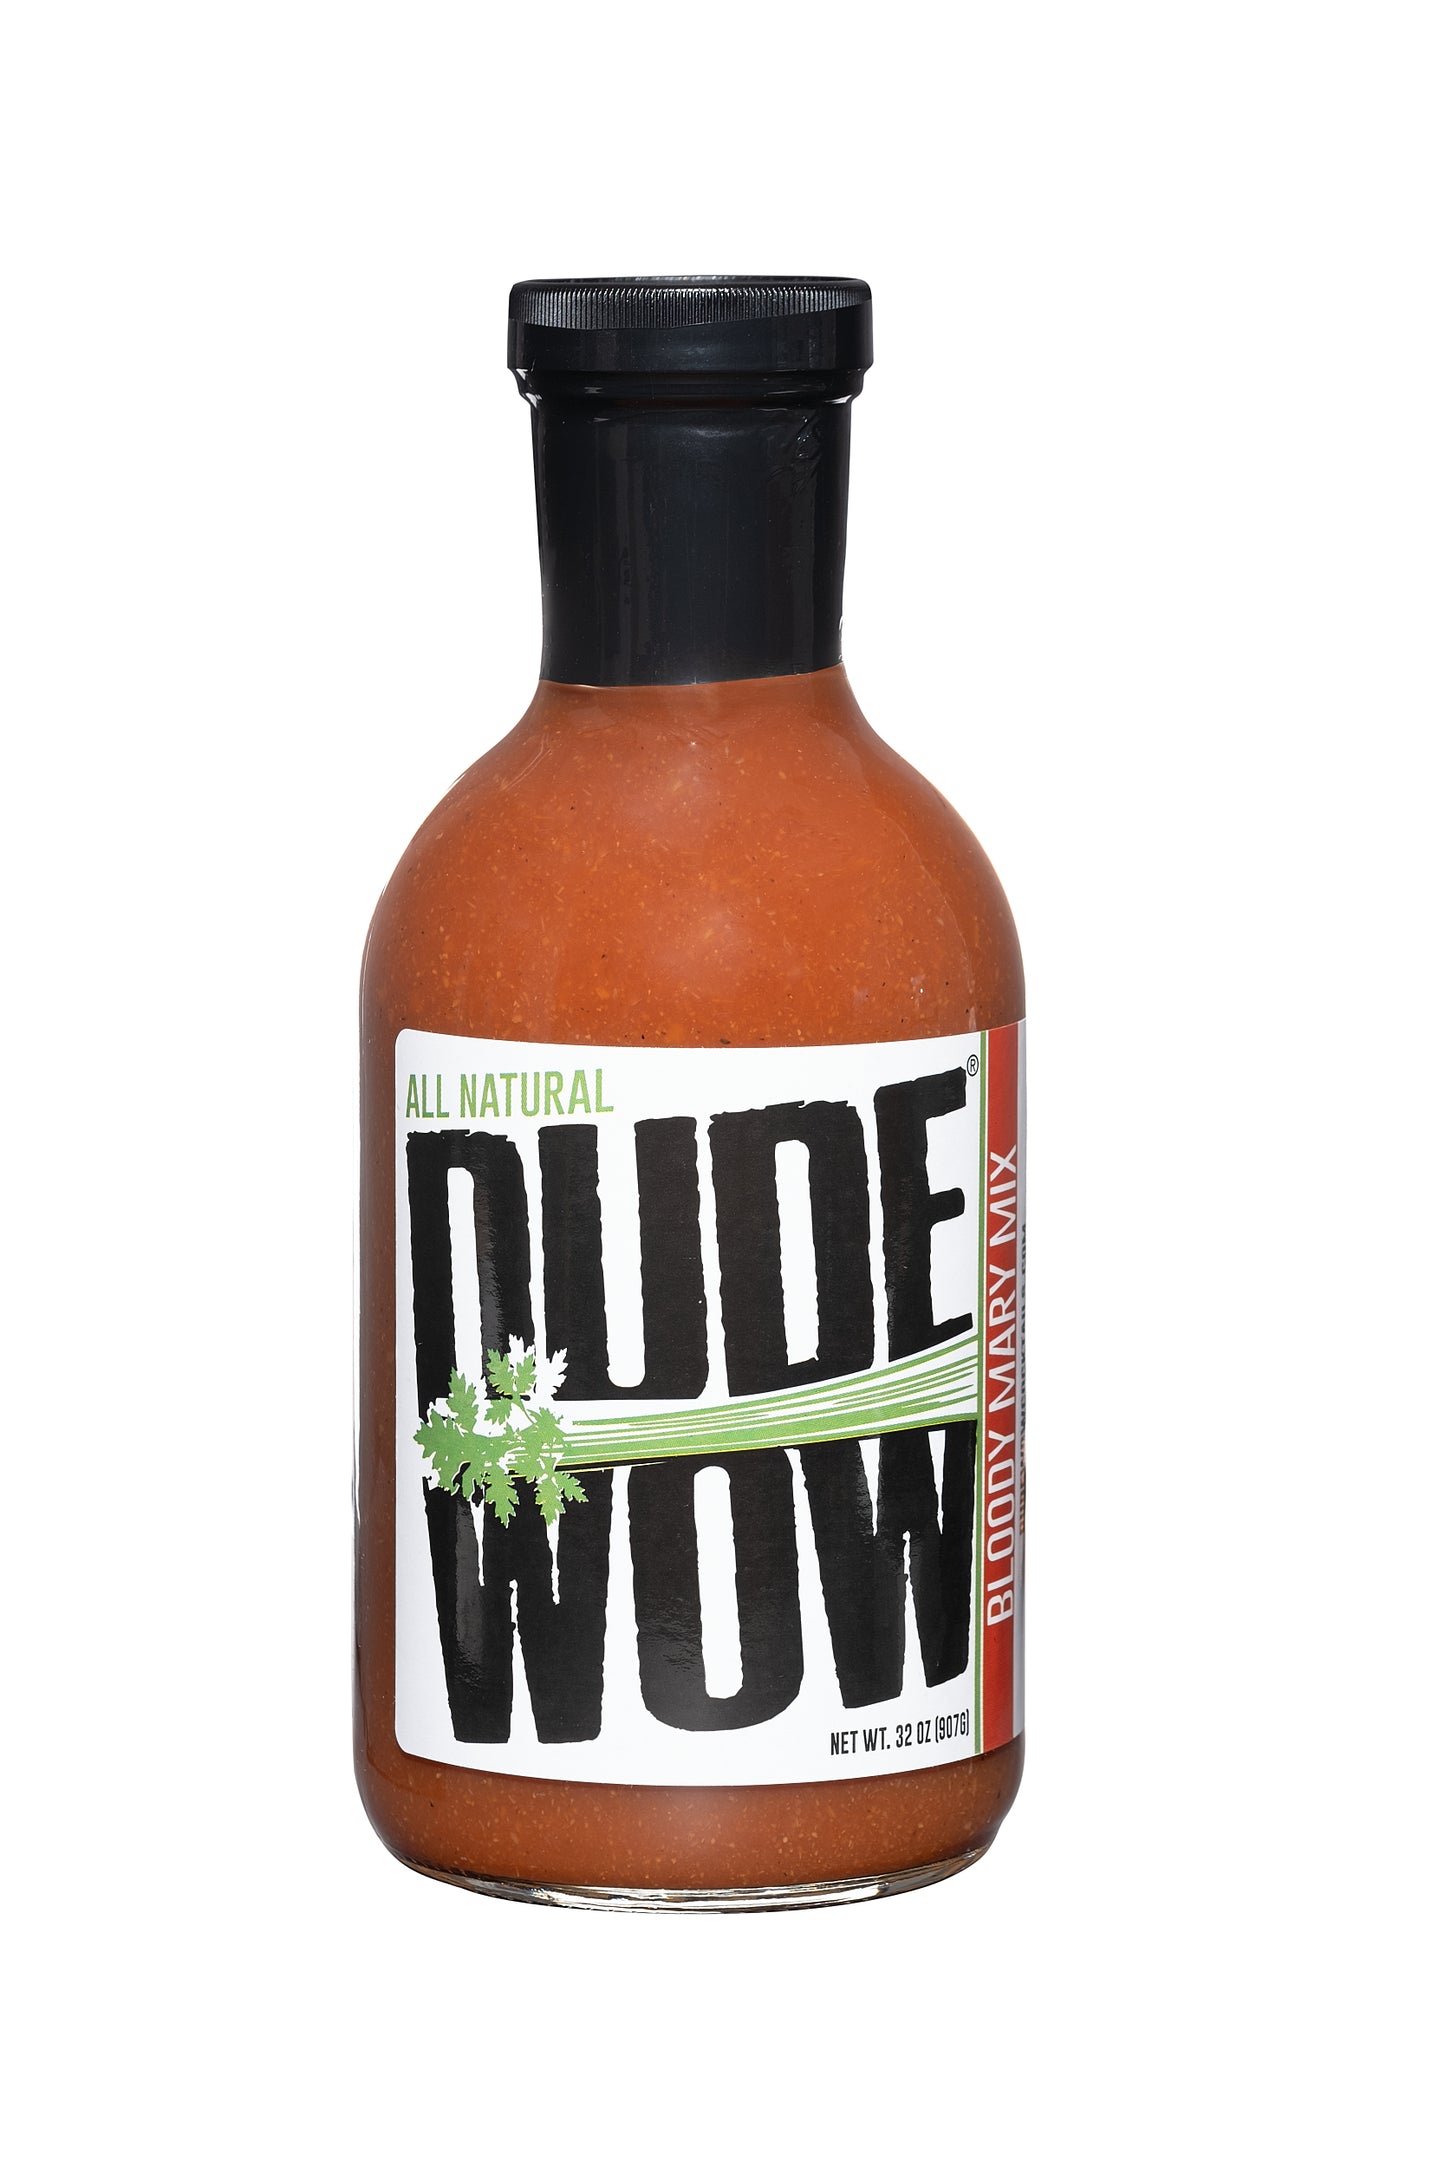 DUDE WOW ALL NATURAL BLOODY MARY MIX 32oz - 2PK